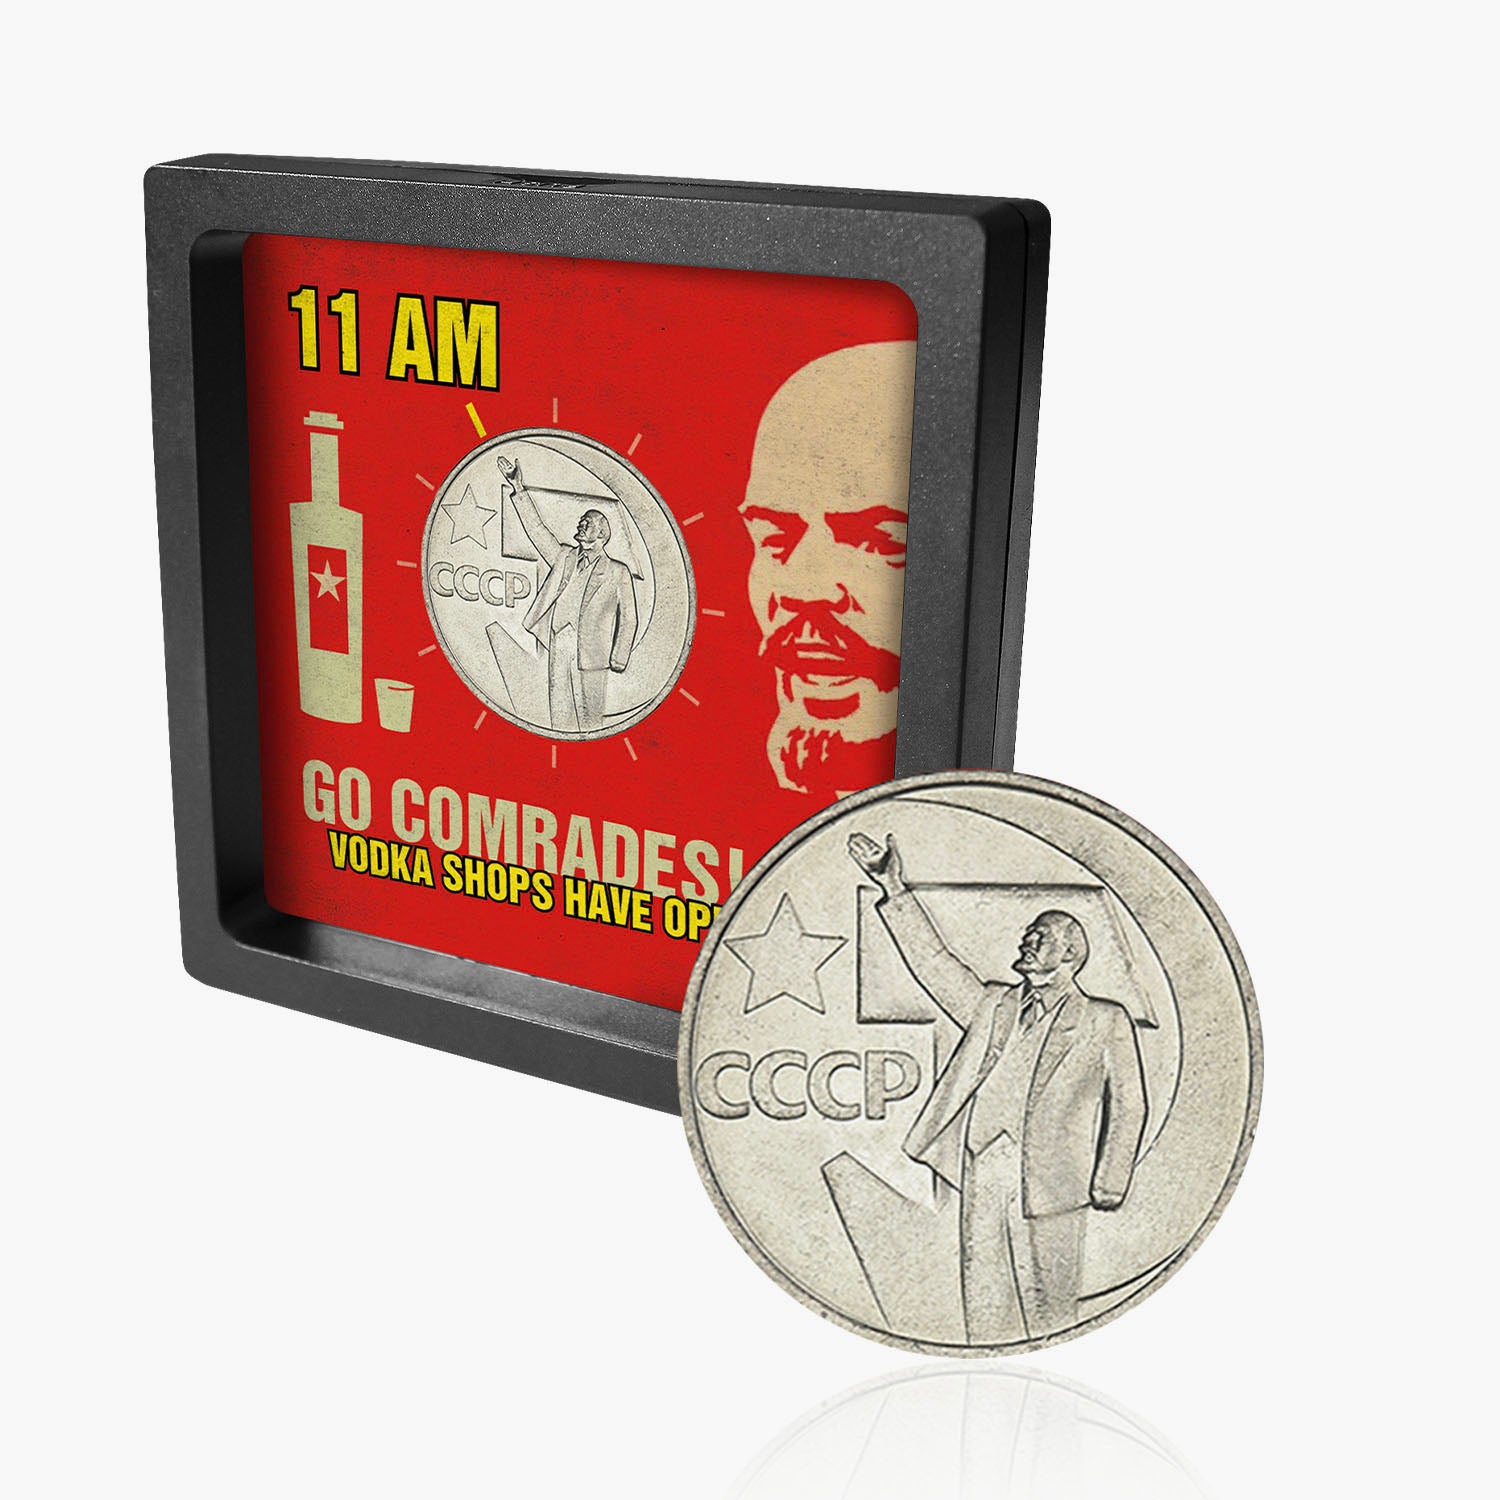 The Russian Drinking Coin